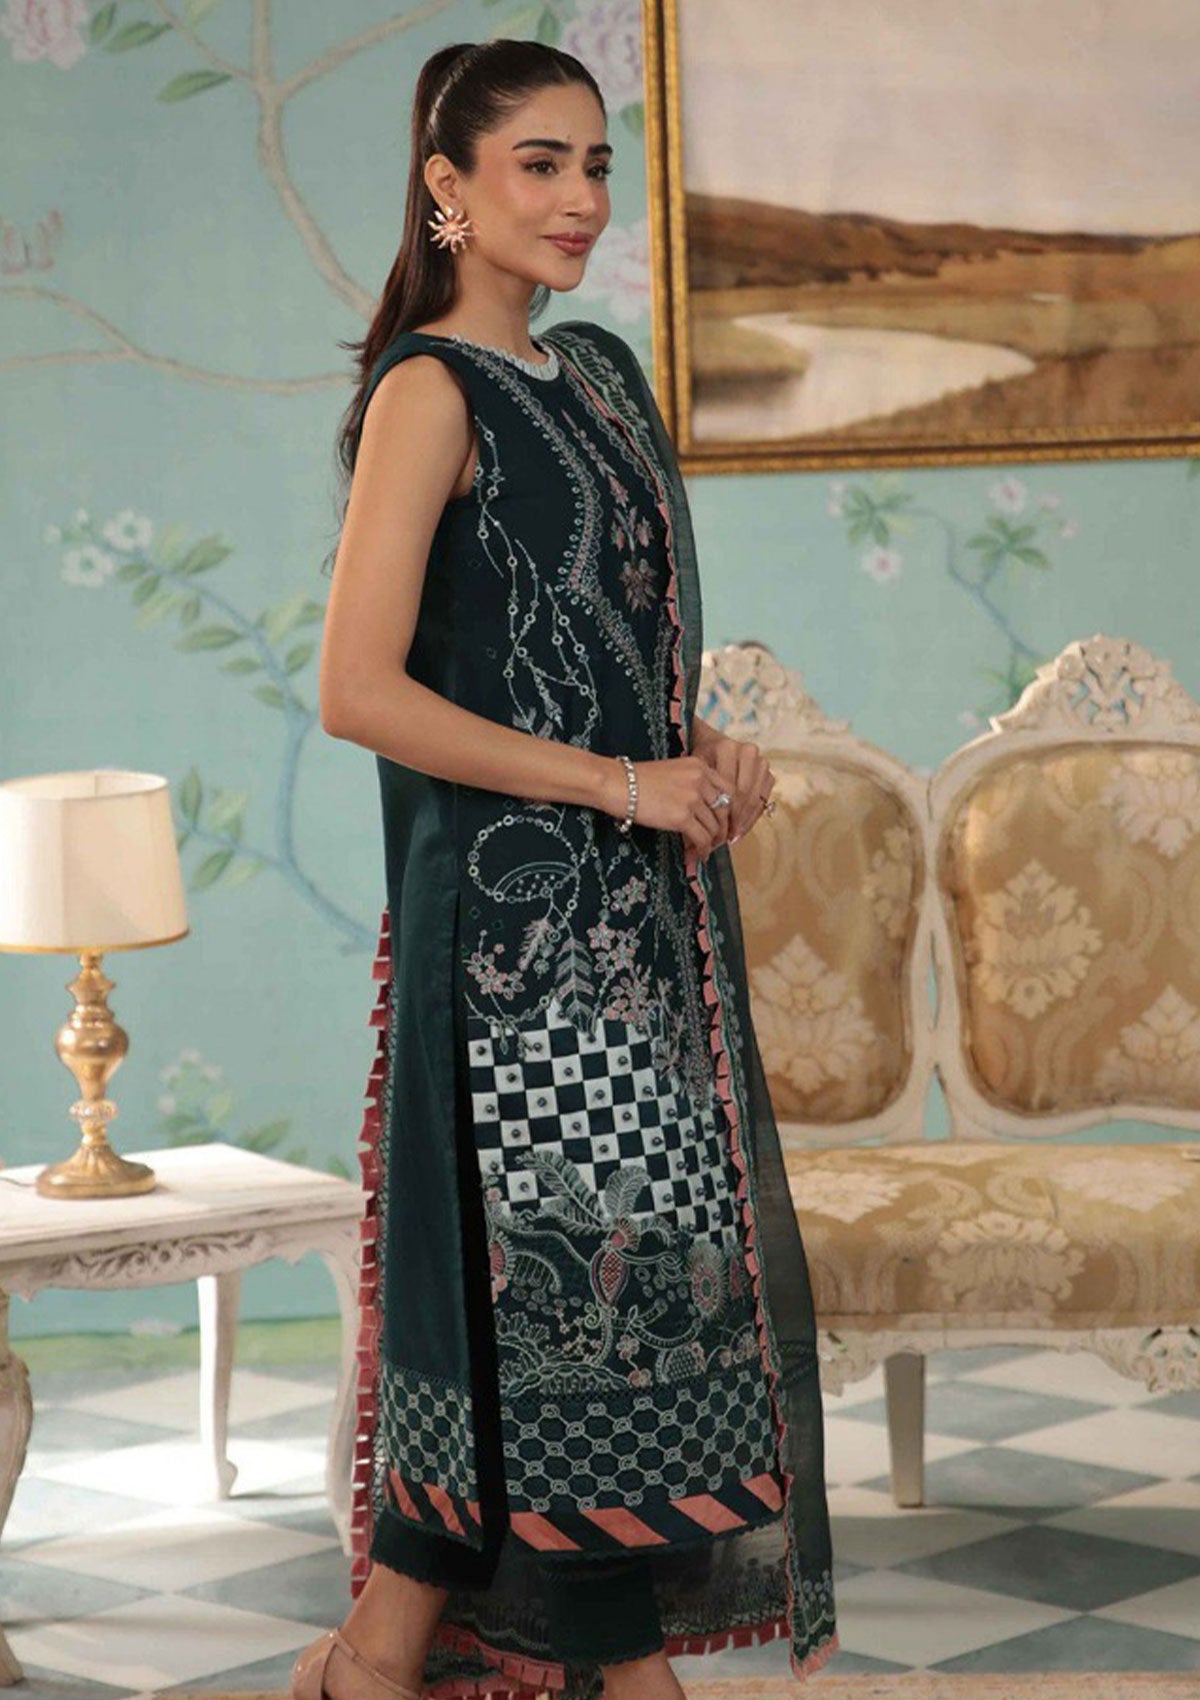 Lawn Collection - Gisele - Summerliness - Luxury - Iris